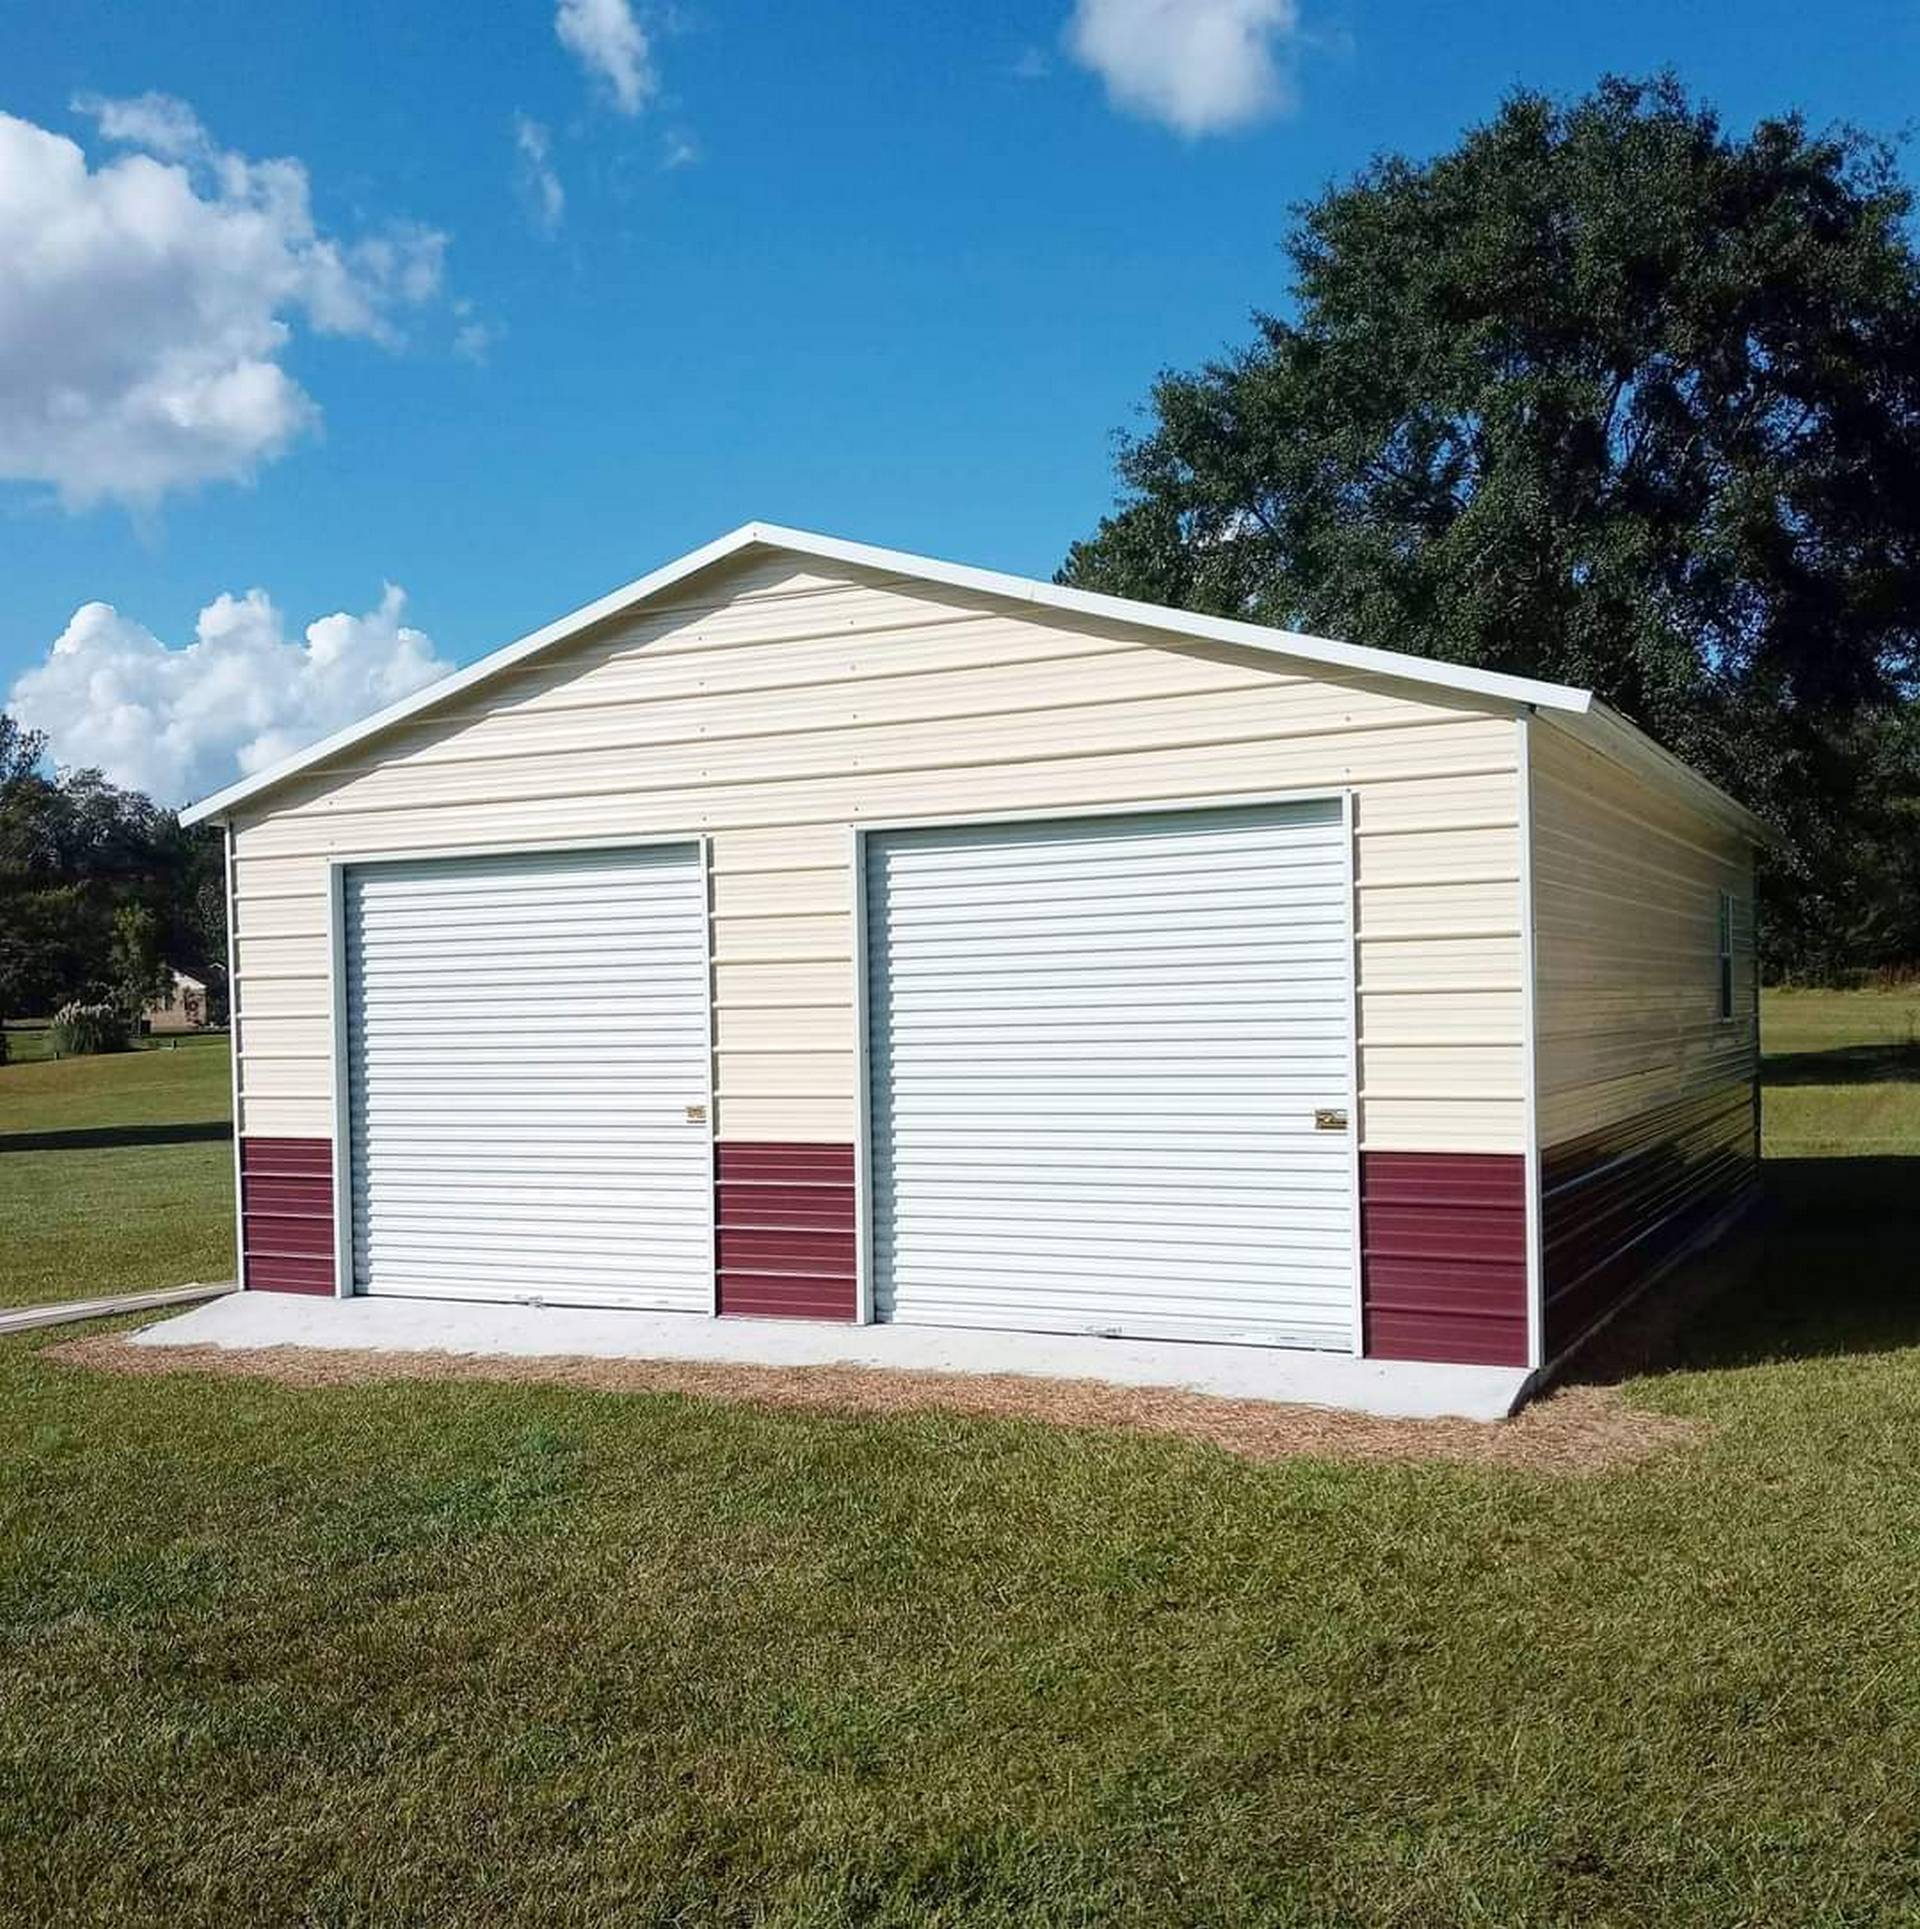 9033 - Double Garage with Wainscoting - Custom Structures Direct